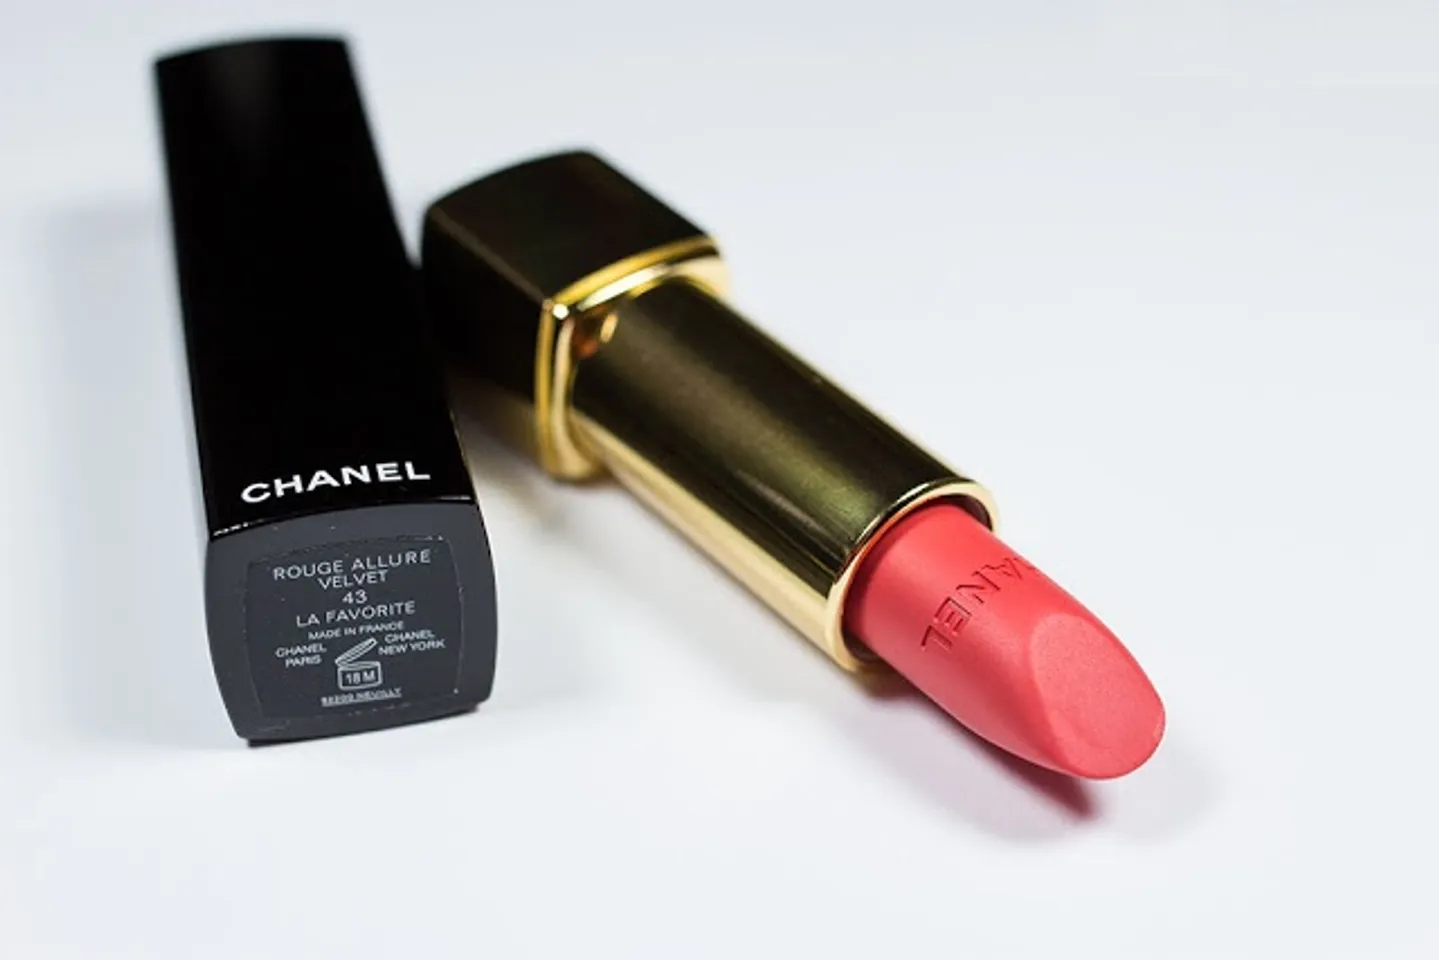 Chanel Rouge Allure Ink Matte Liquid Lip Color in 142 Creatif  150  Luxuriant Review and Swatches  The Happy Sloths Beauty Makeup and  Skincare Blog with Reviews and Swatches